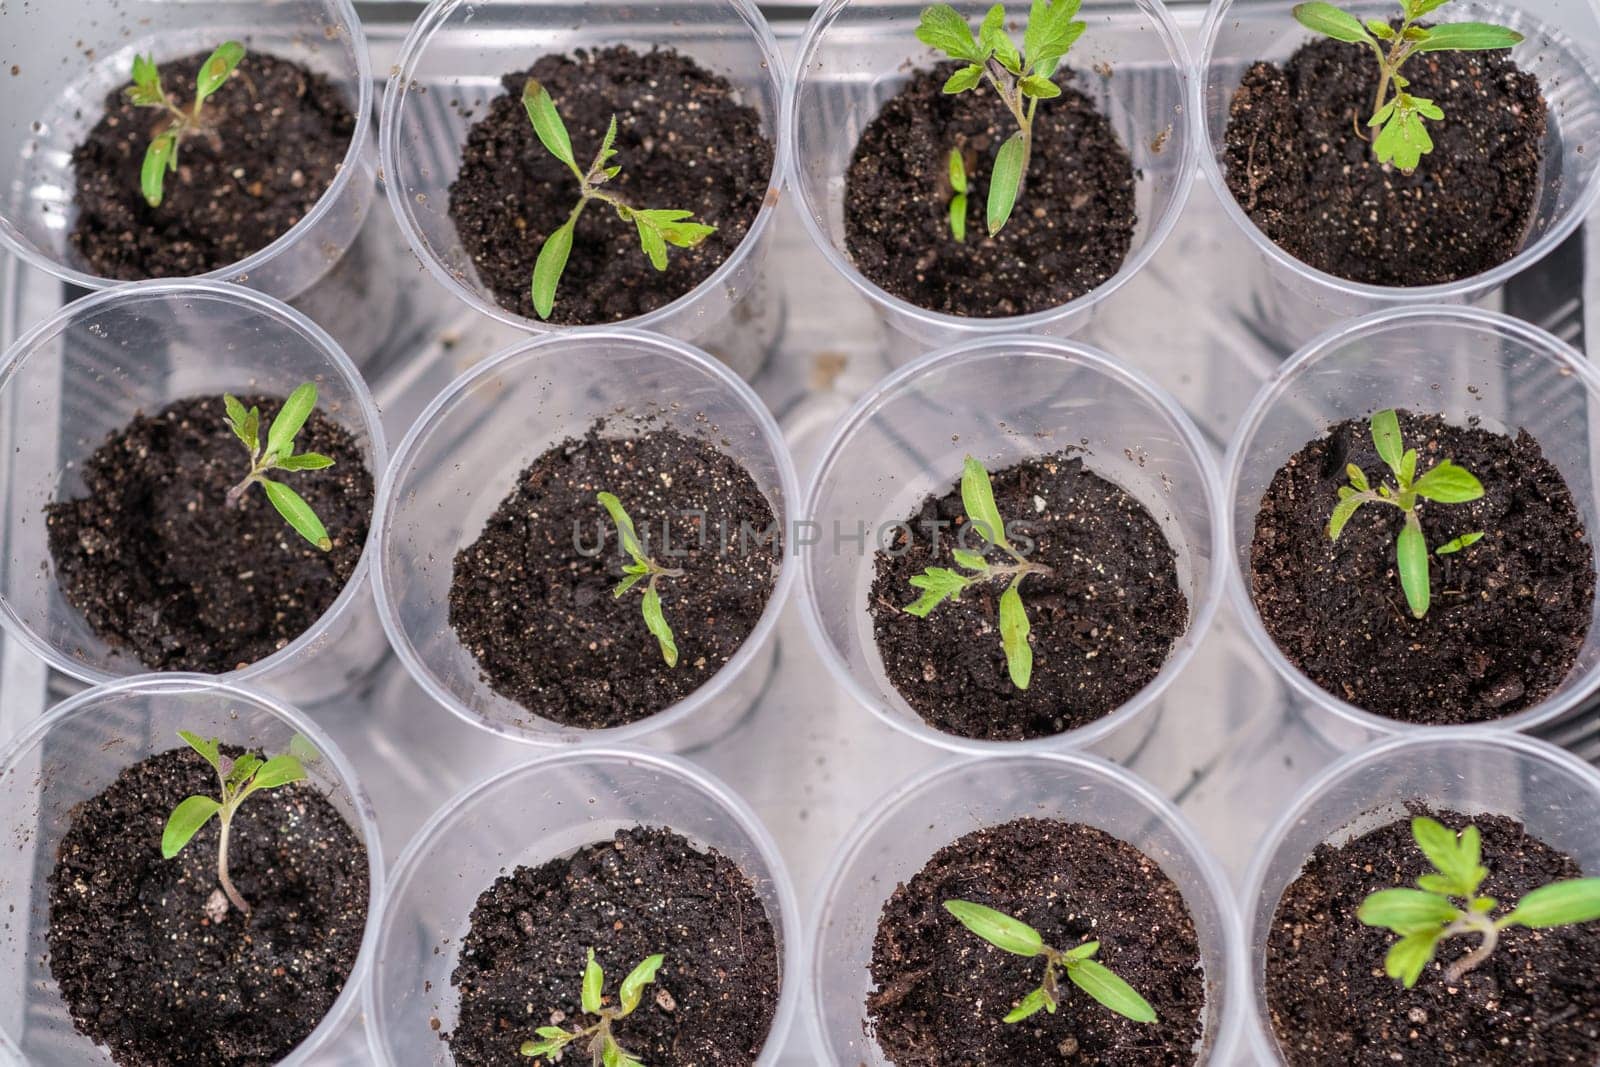 Group of tomato seedlings in plastic glasses on windows sill. Close-up of seedlings of green small thin leaves of a tomato plant in a container growing indoors in the soil in spring.